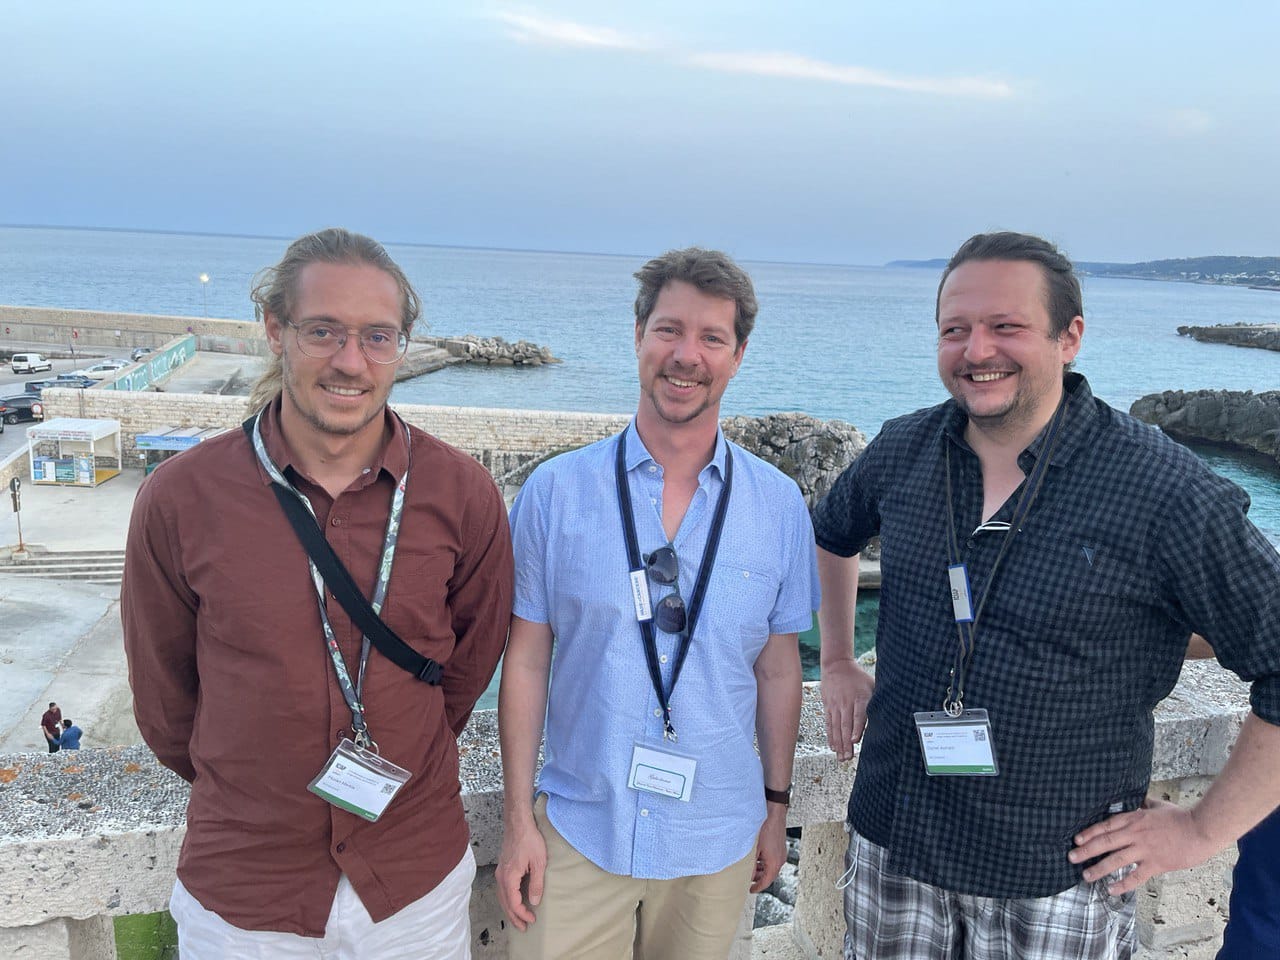 DiBSE Alumnus Daniel Aumayr and DiBSE Project Researcher Florian Merkle took part at the ICIAP in Lecce in Italy.